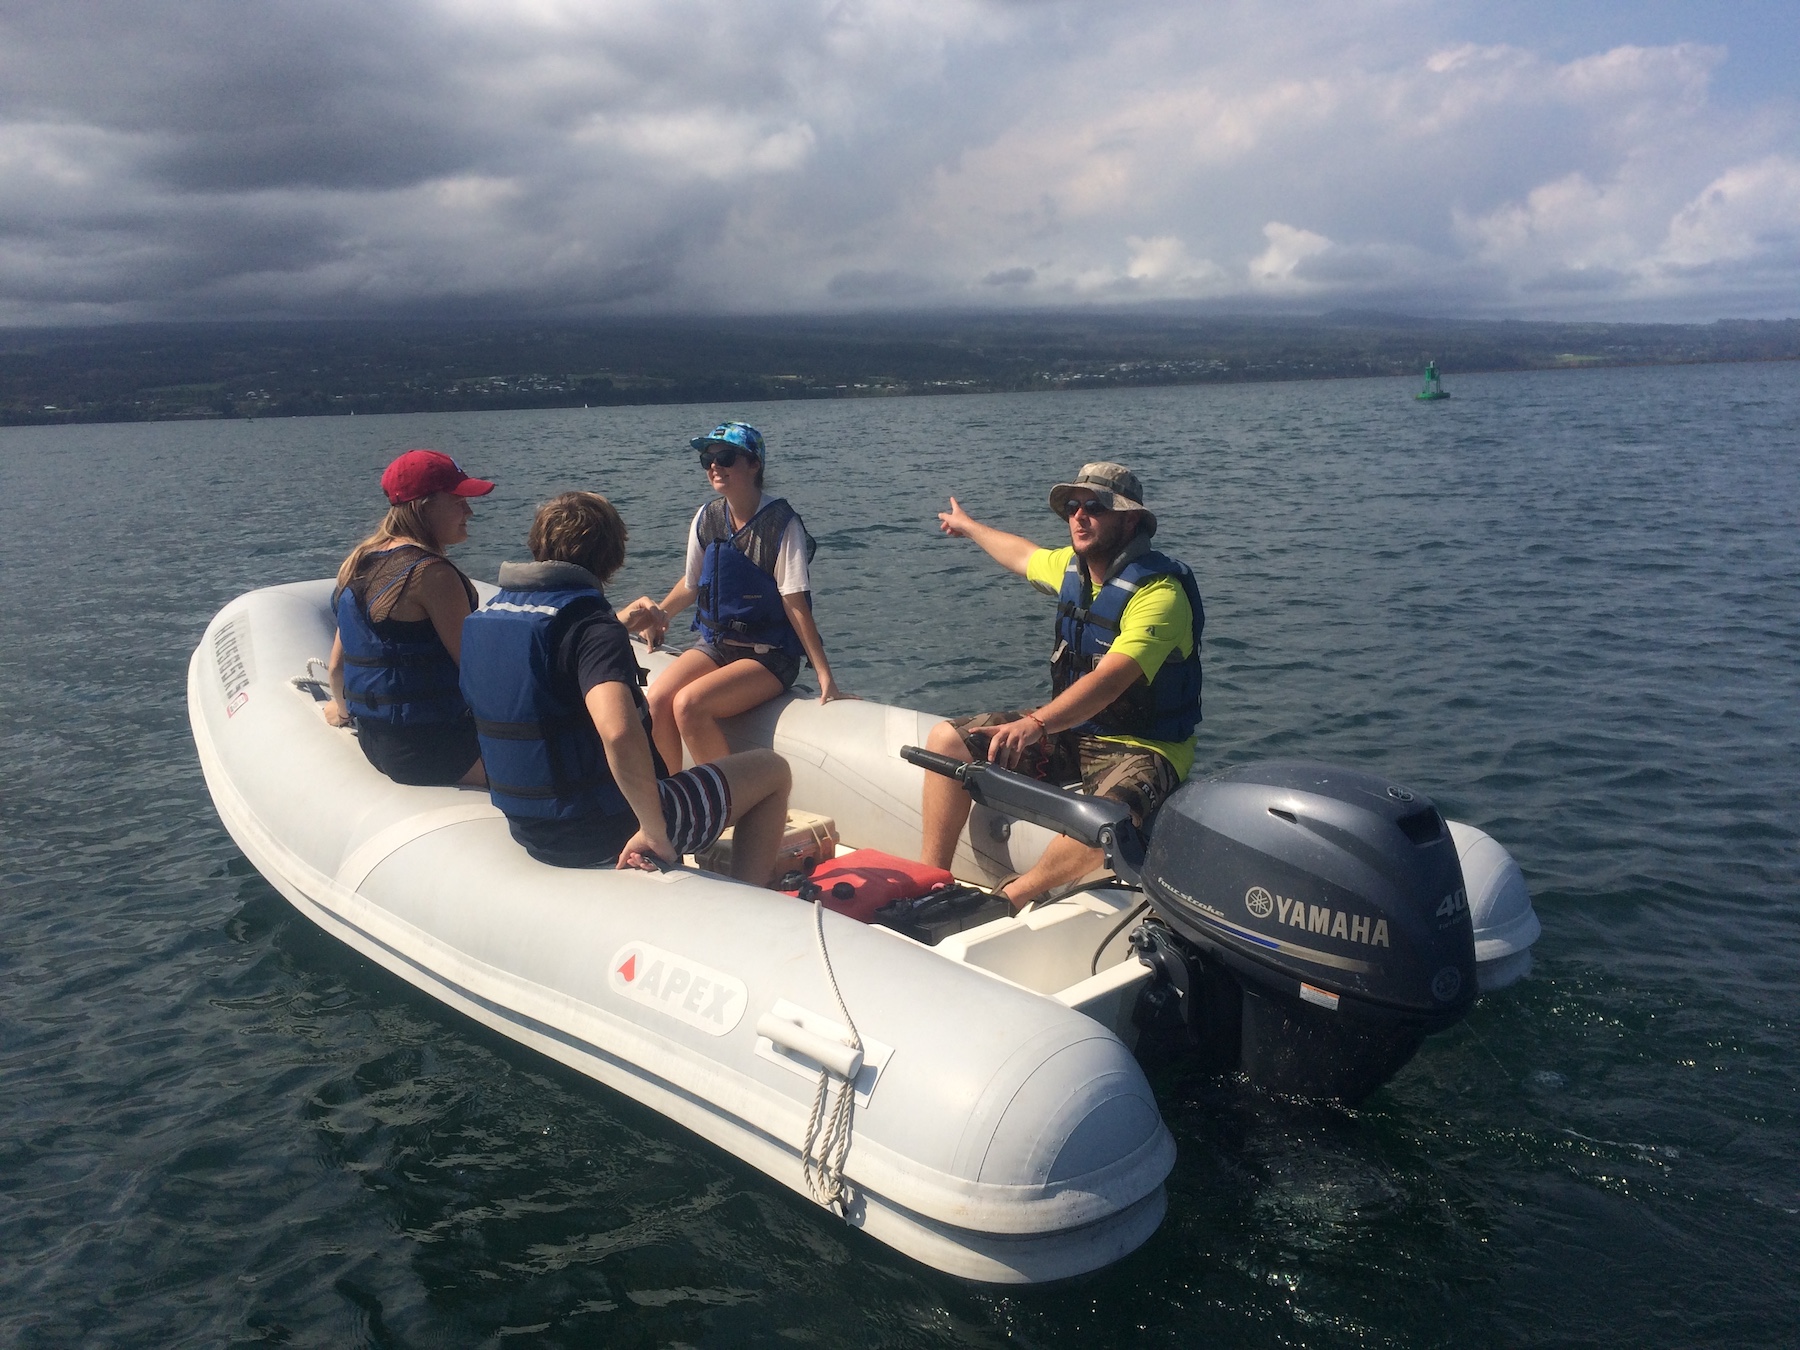 Rigid Inflateable Boat with student crew aboard